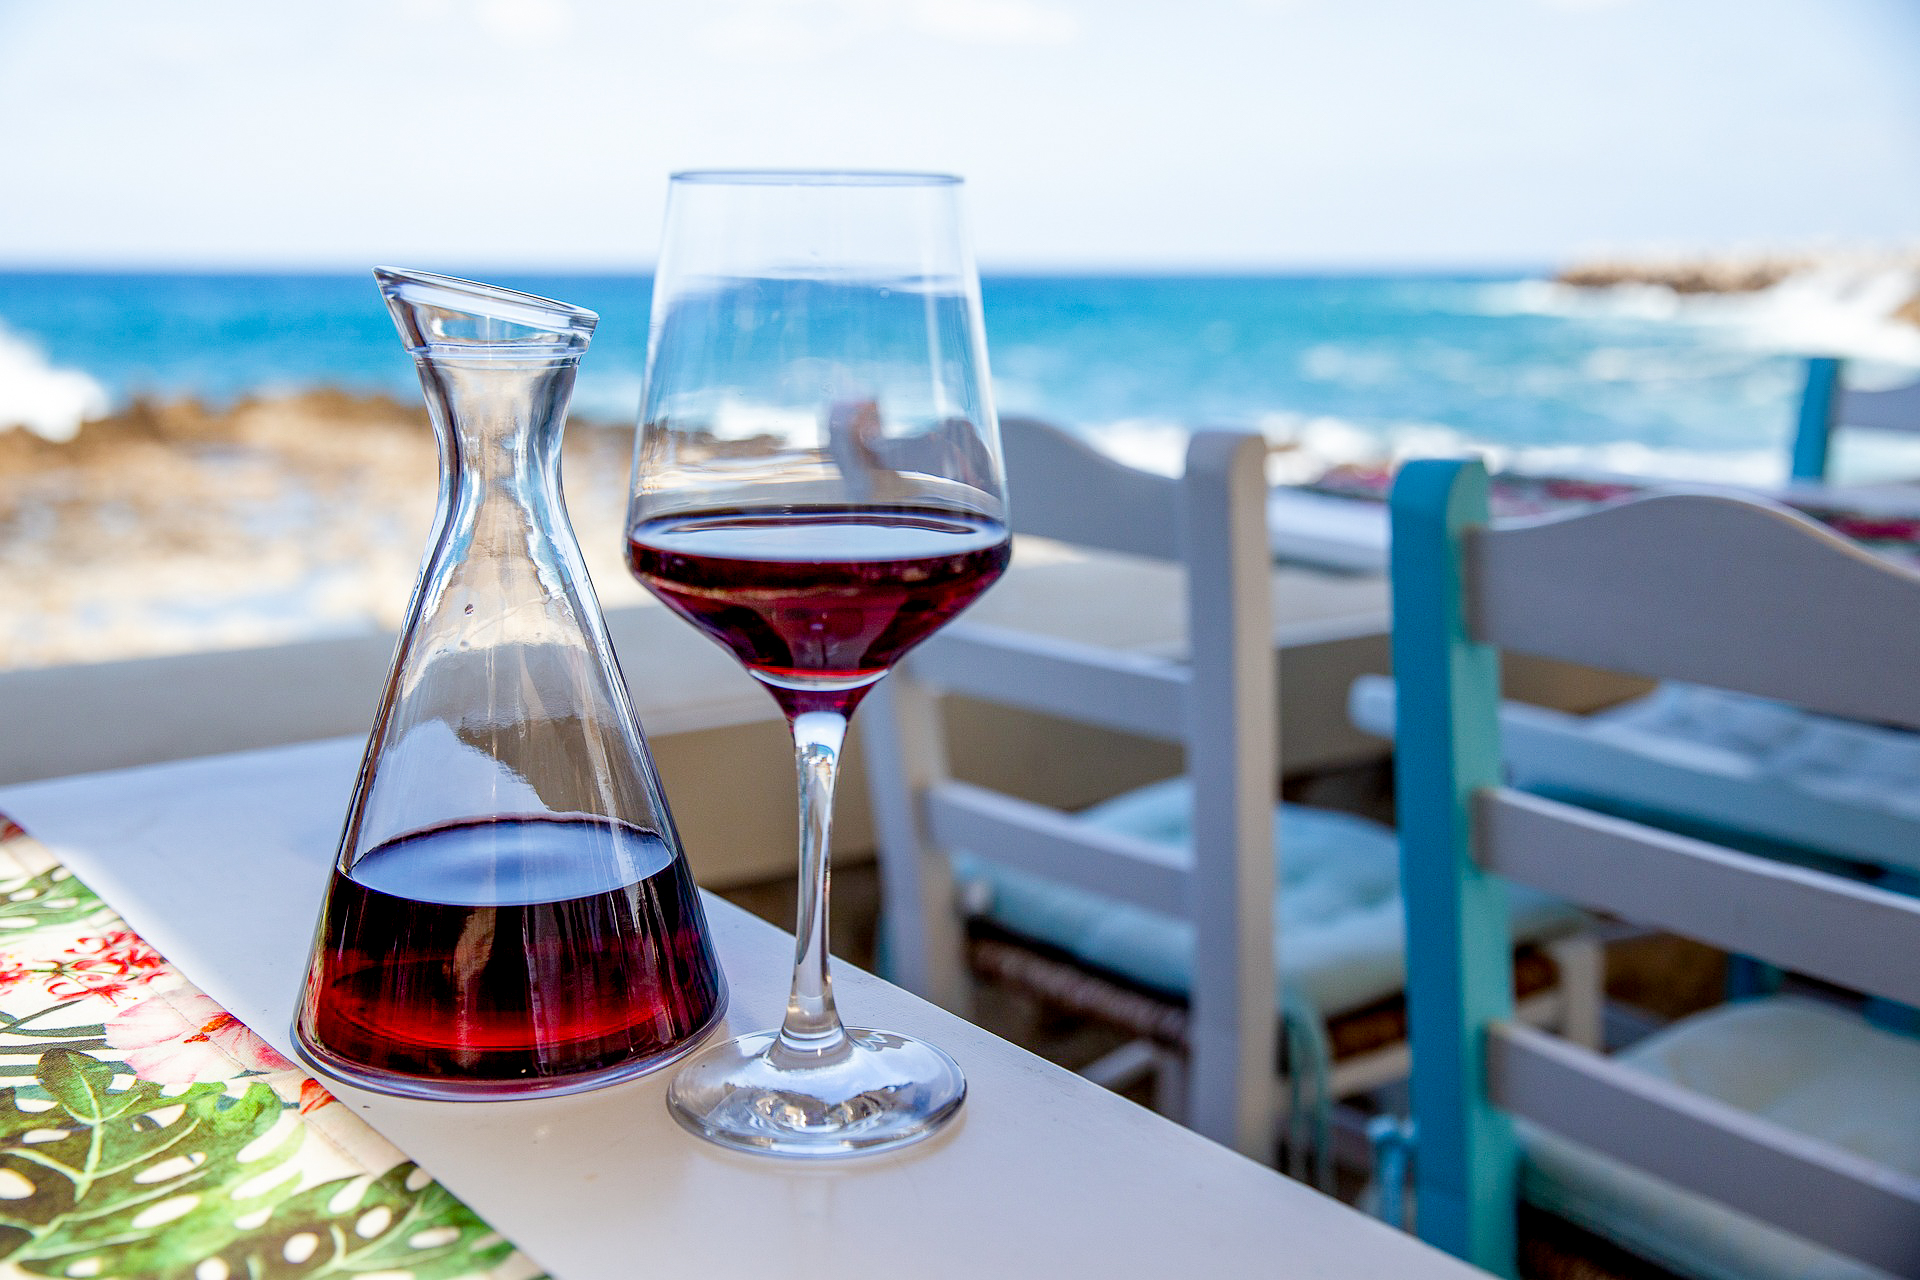 A glass of wine served on a table in Greece